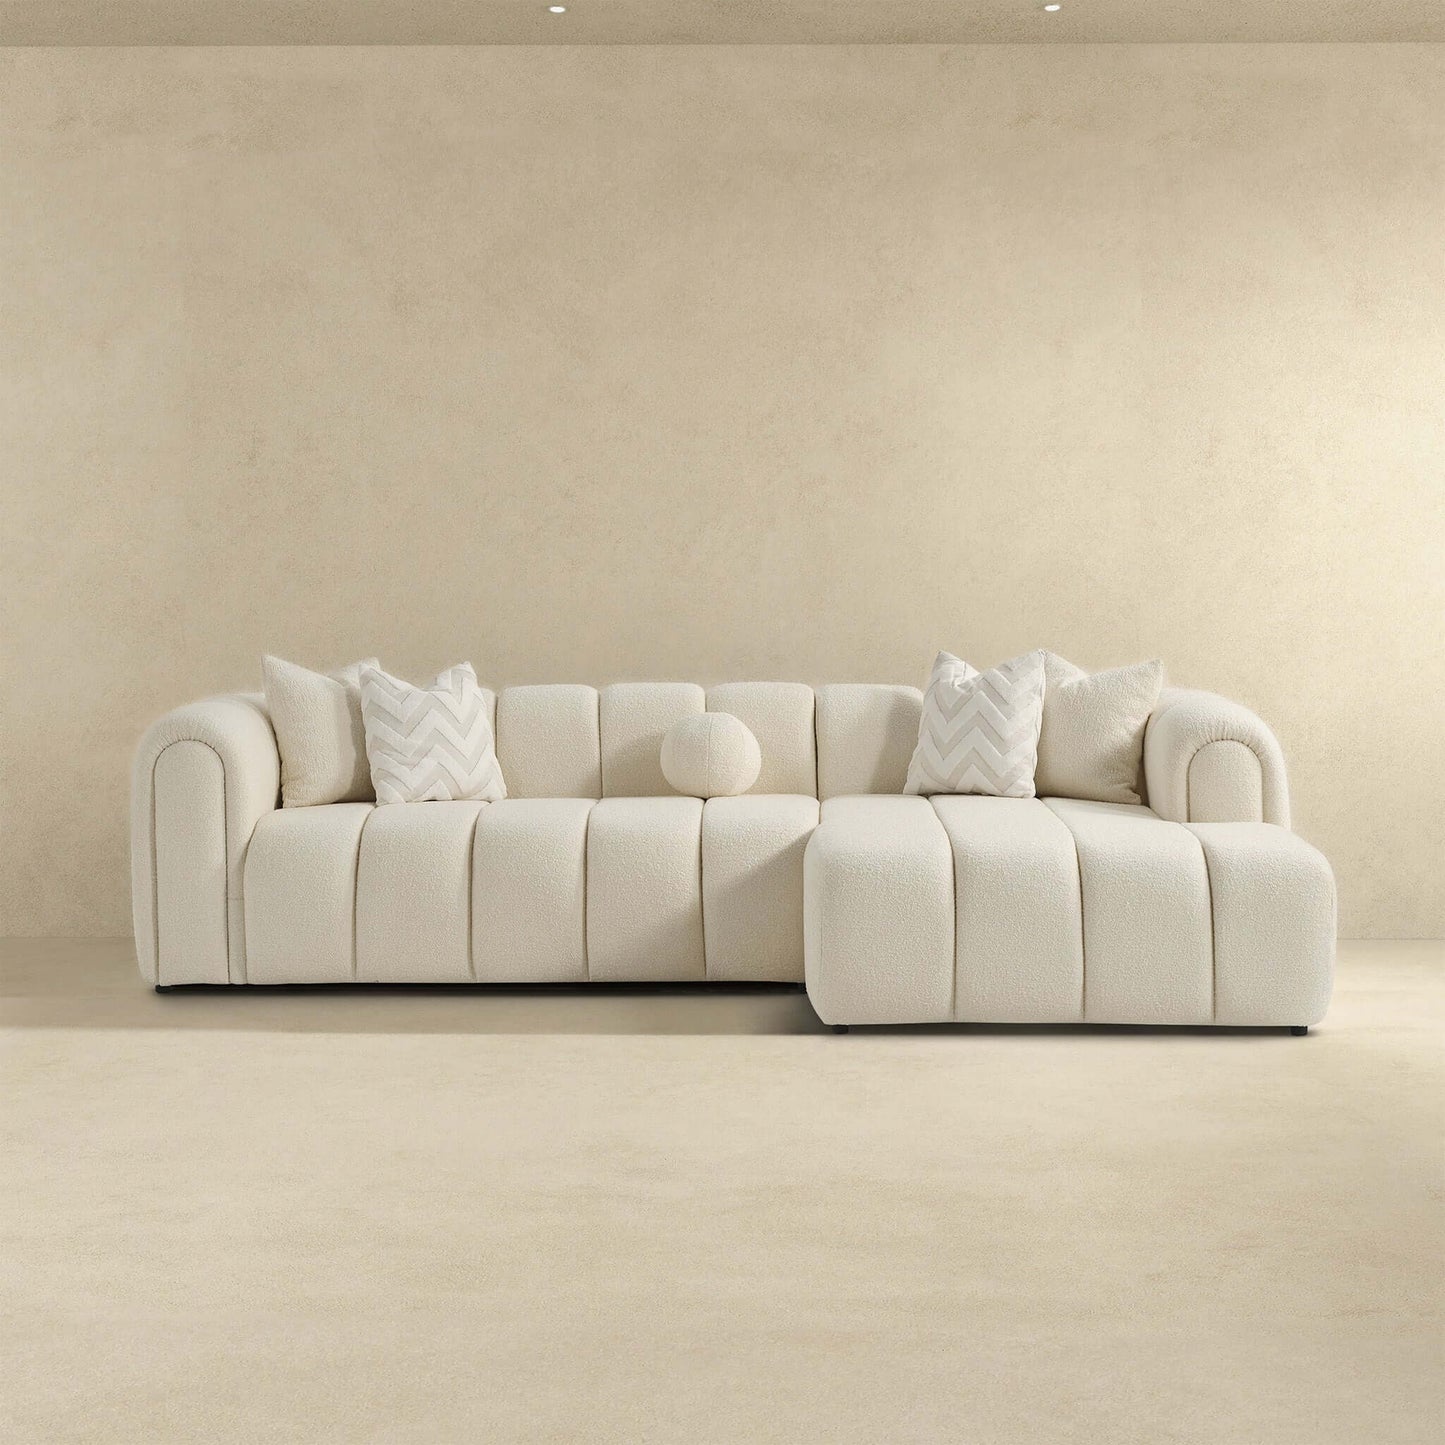 Beatrice Modern Tufted Ivory Boucle Right Sectional Sofa